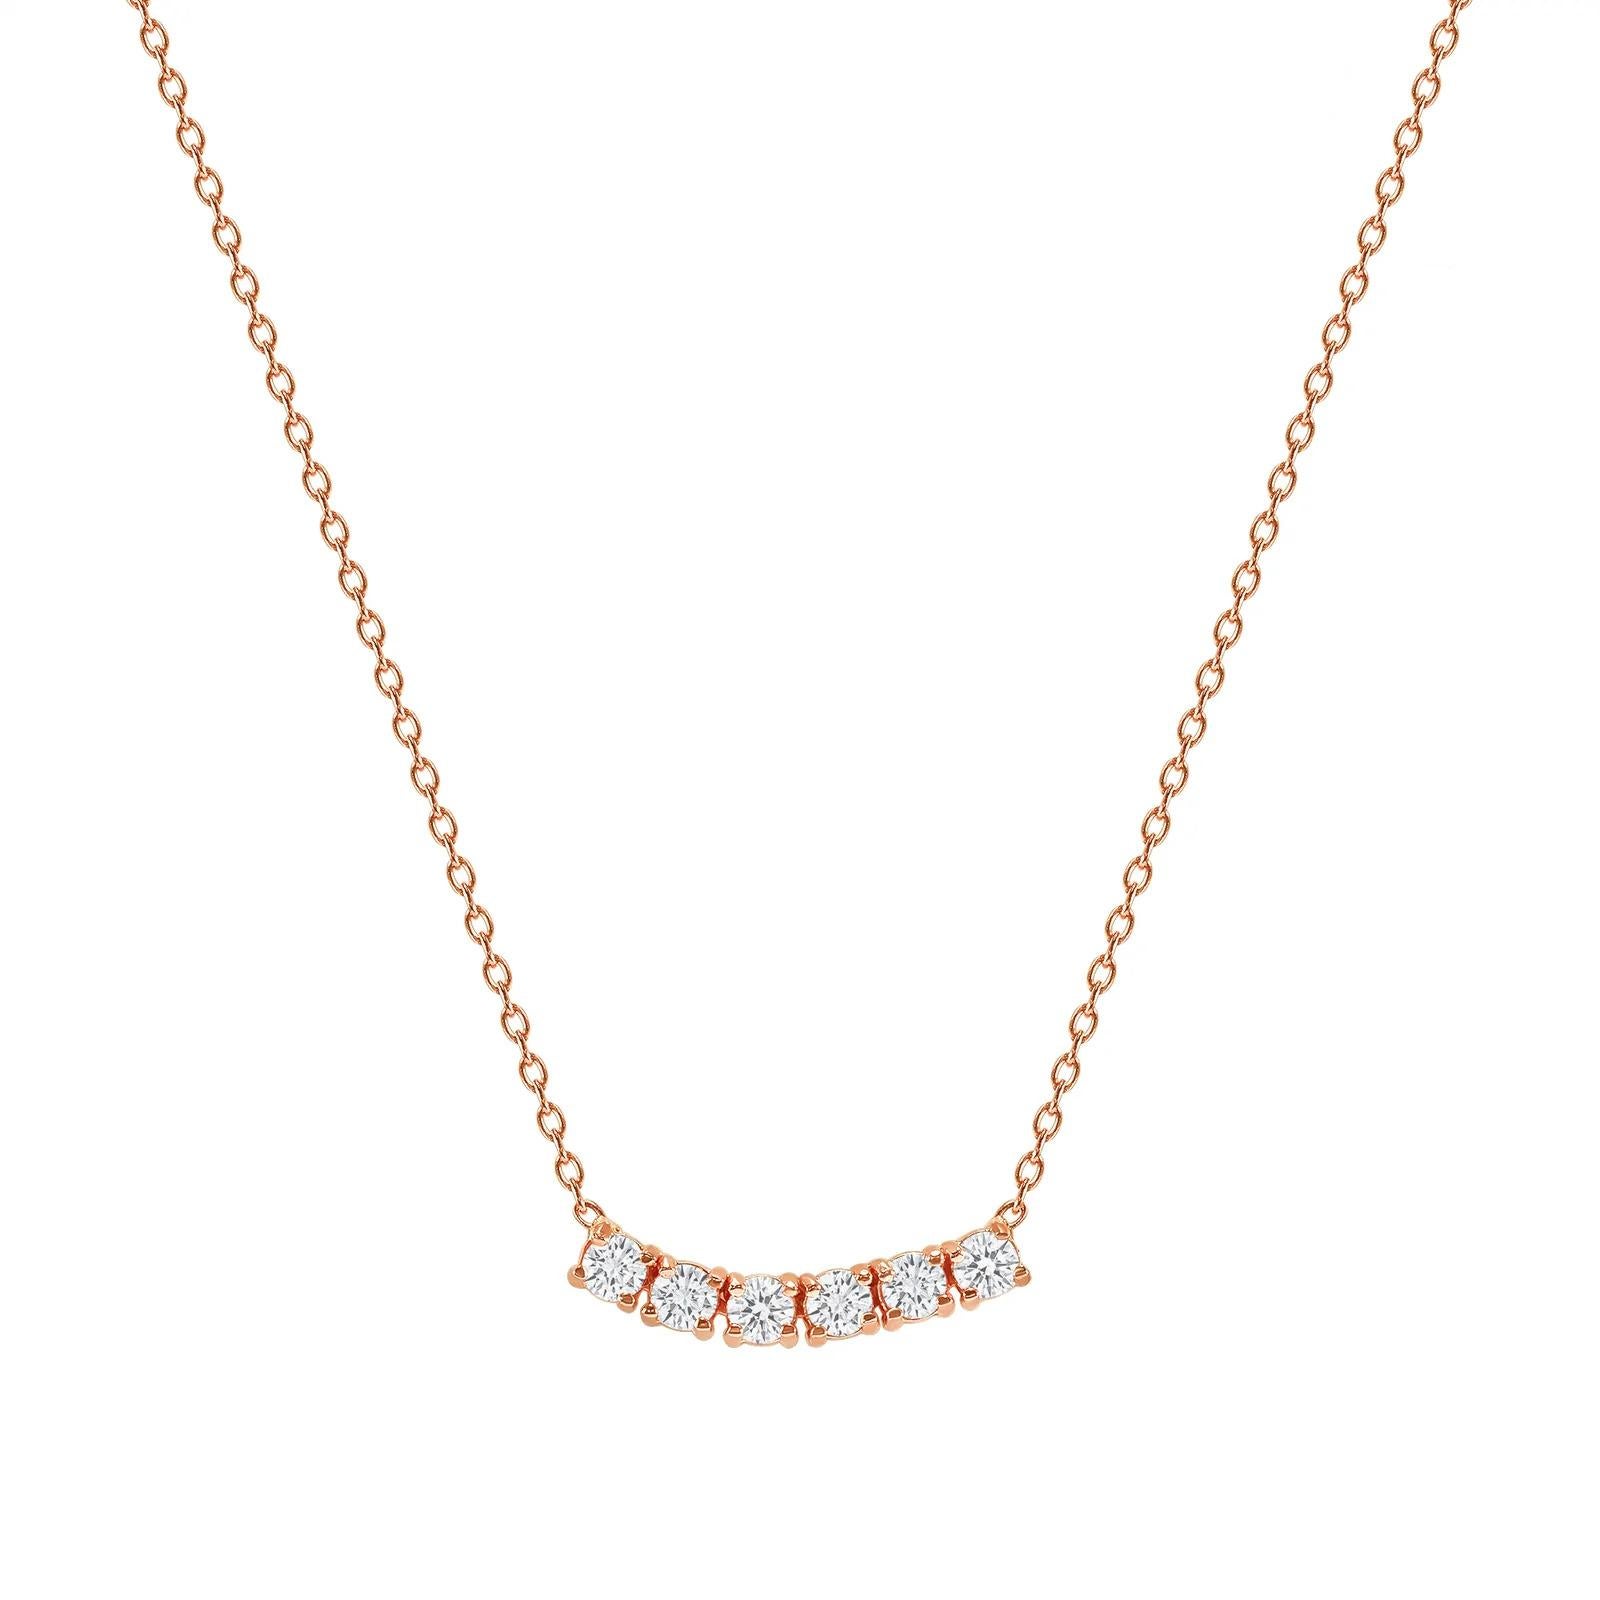 This petite, curved diamond necklace is crafted with gorgeous 14k gold set with six round diamonds.  

Gold: 14k 
Diamond Total Carats: 0.50 ct
Diamond Cut: Round (6 diamonds)
Diamond Clarity: VS
Diamond Color: F
Color: Rose Gold
Necklace Length: 22